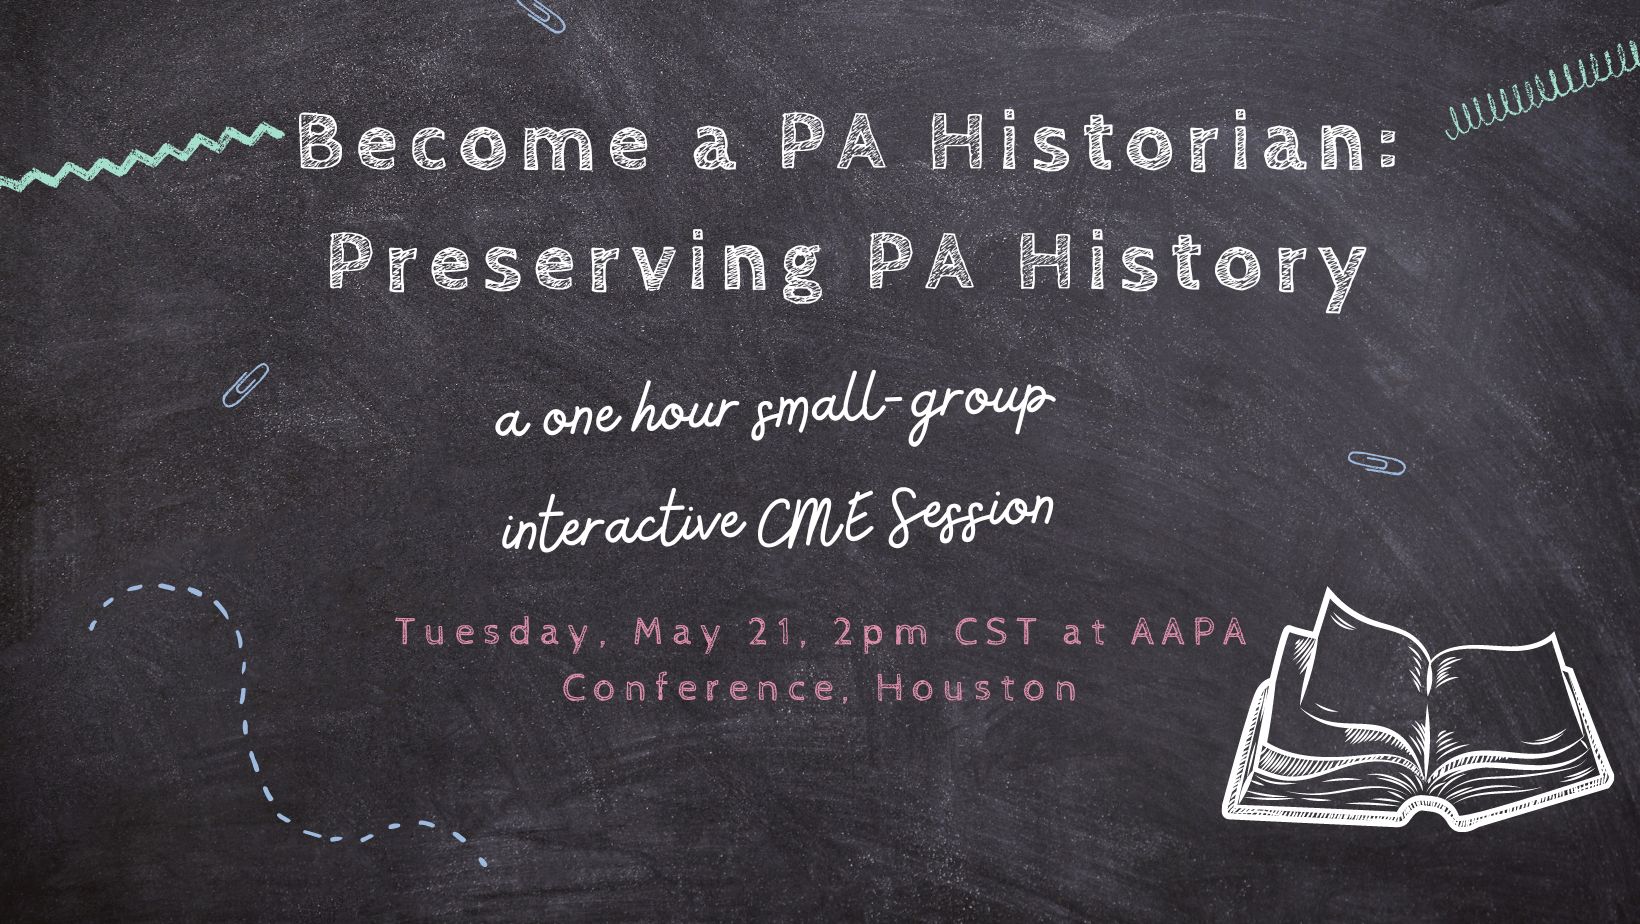 Our First AAPA Small Group CME Session! Physician Assistant History